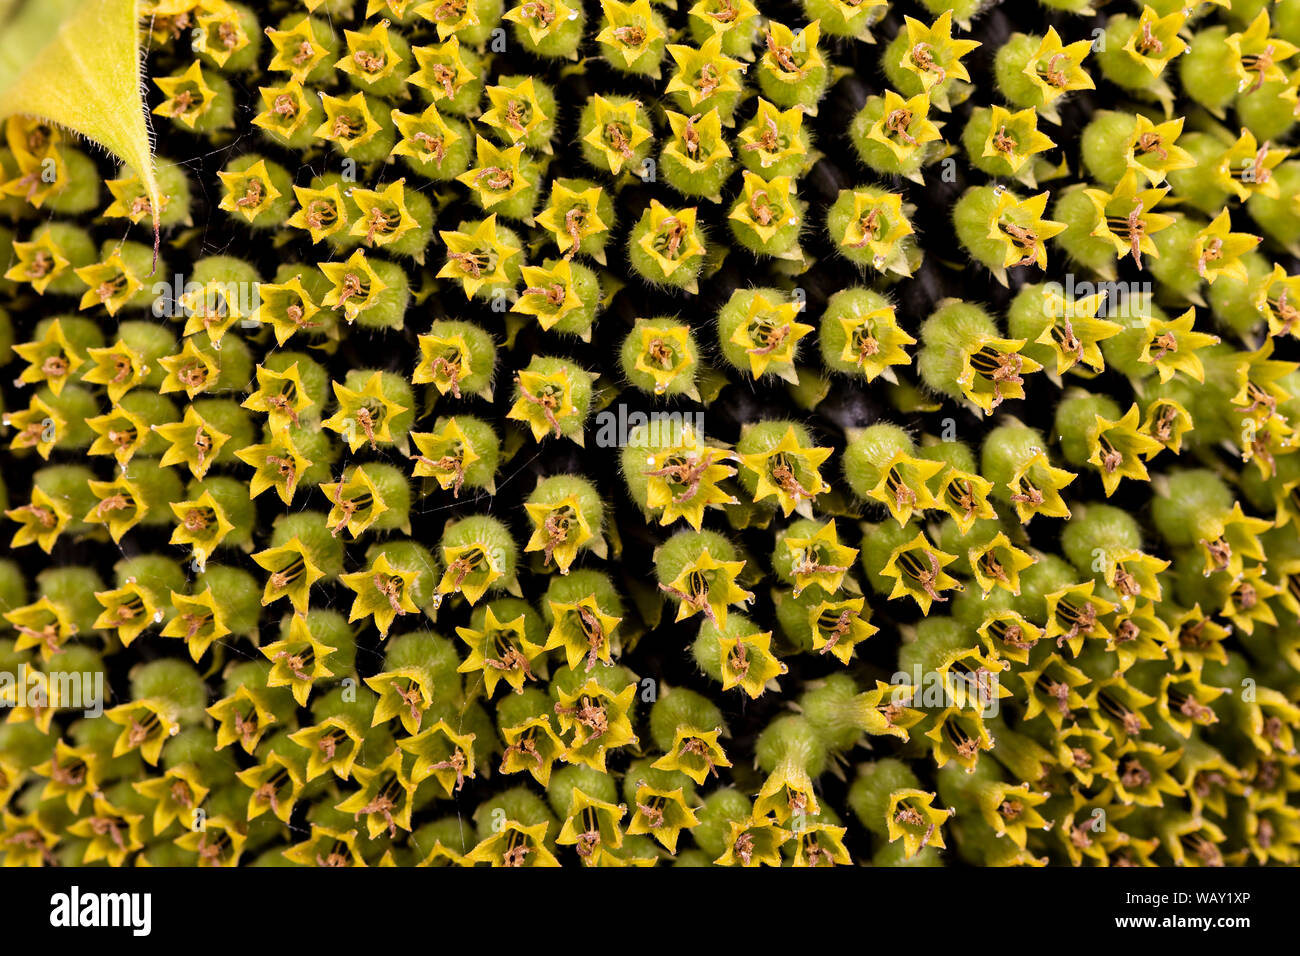 Sunflower with flowers in sight (close-up) Stock Photo